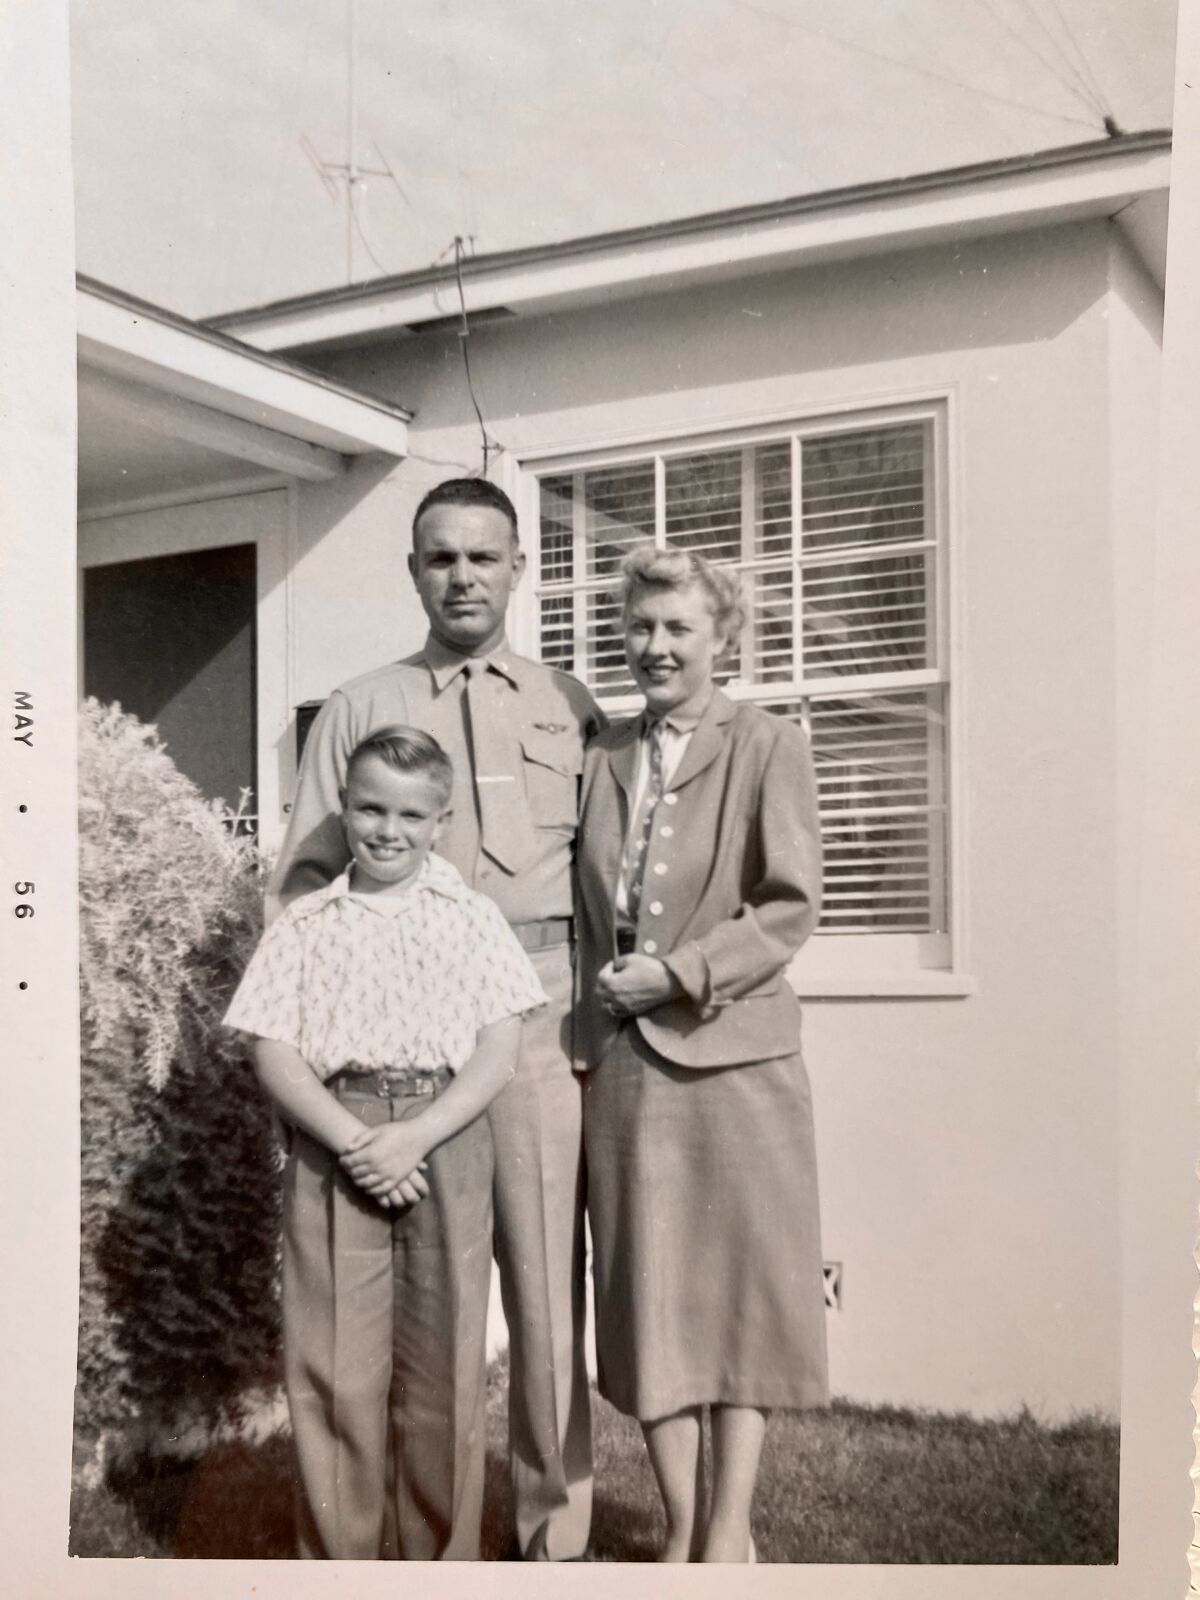 Arthur and Gini Kebeck pose with their son Chris in La Jolla in 1956.